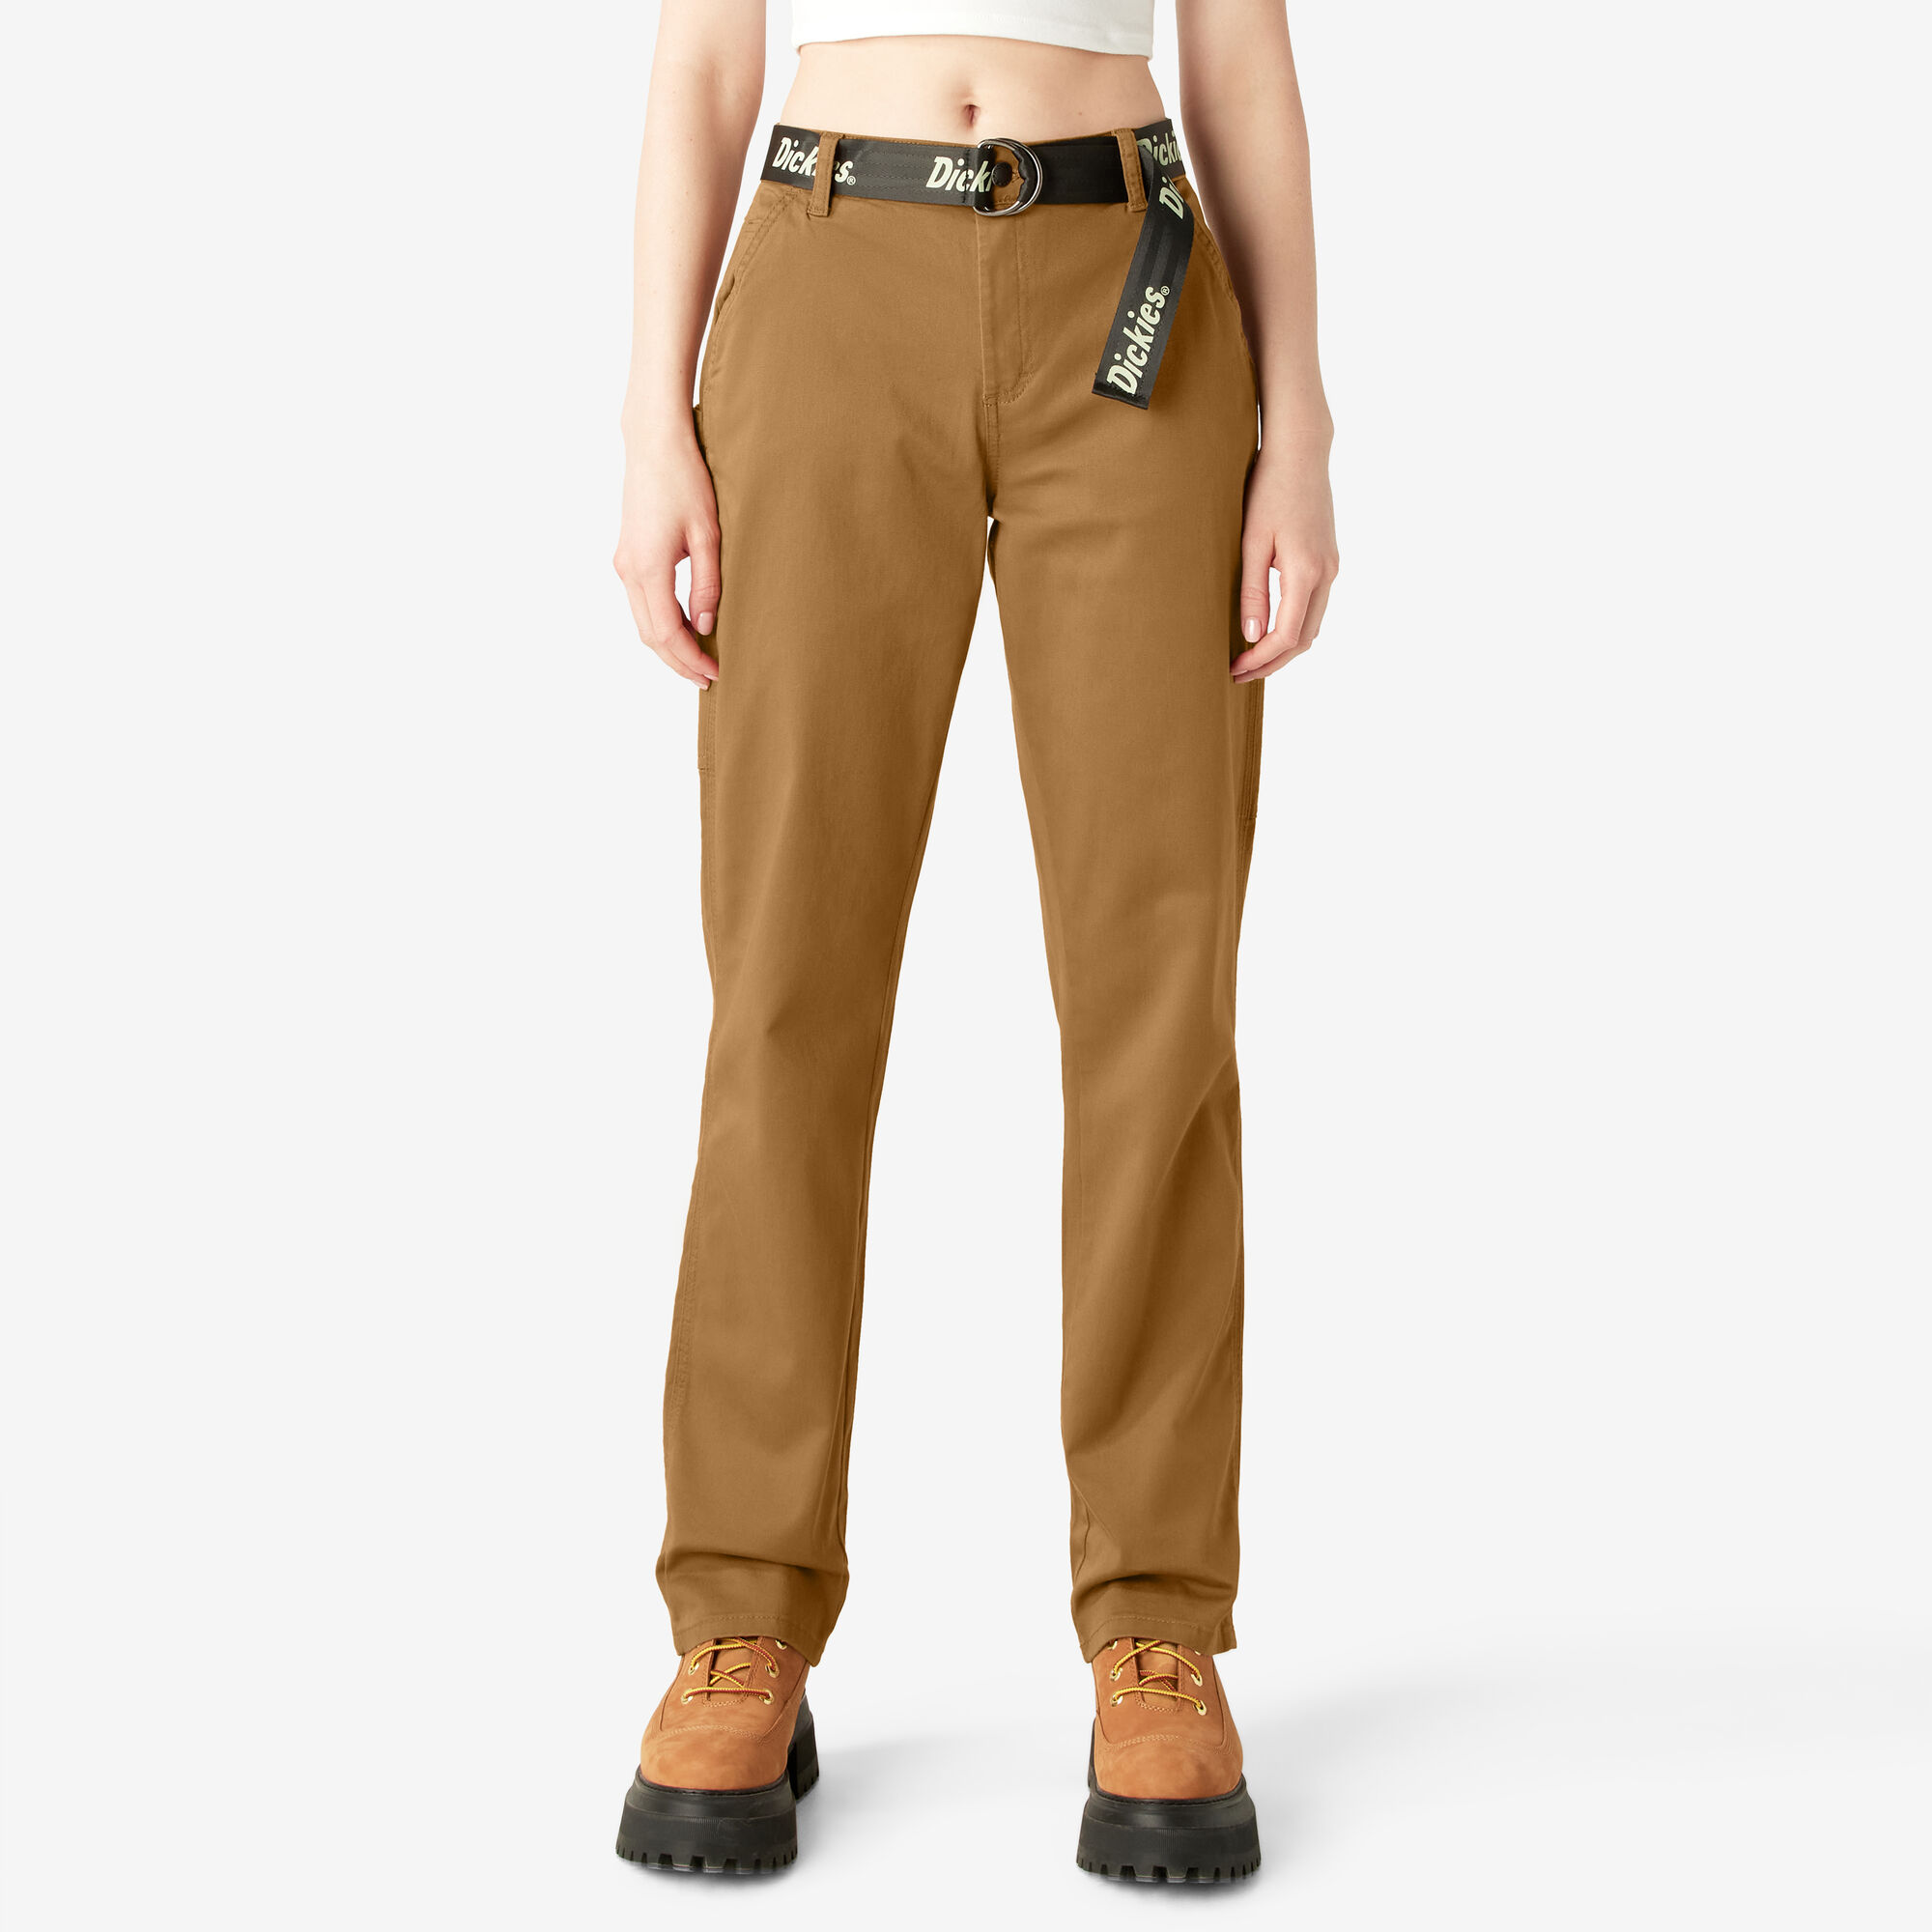 Women's Relaxed Fit Carpenter Pants Dickies US